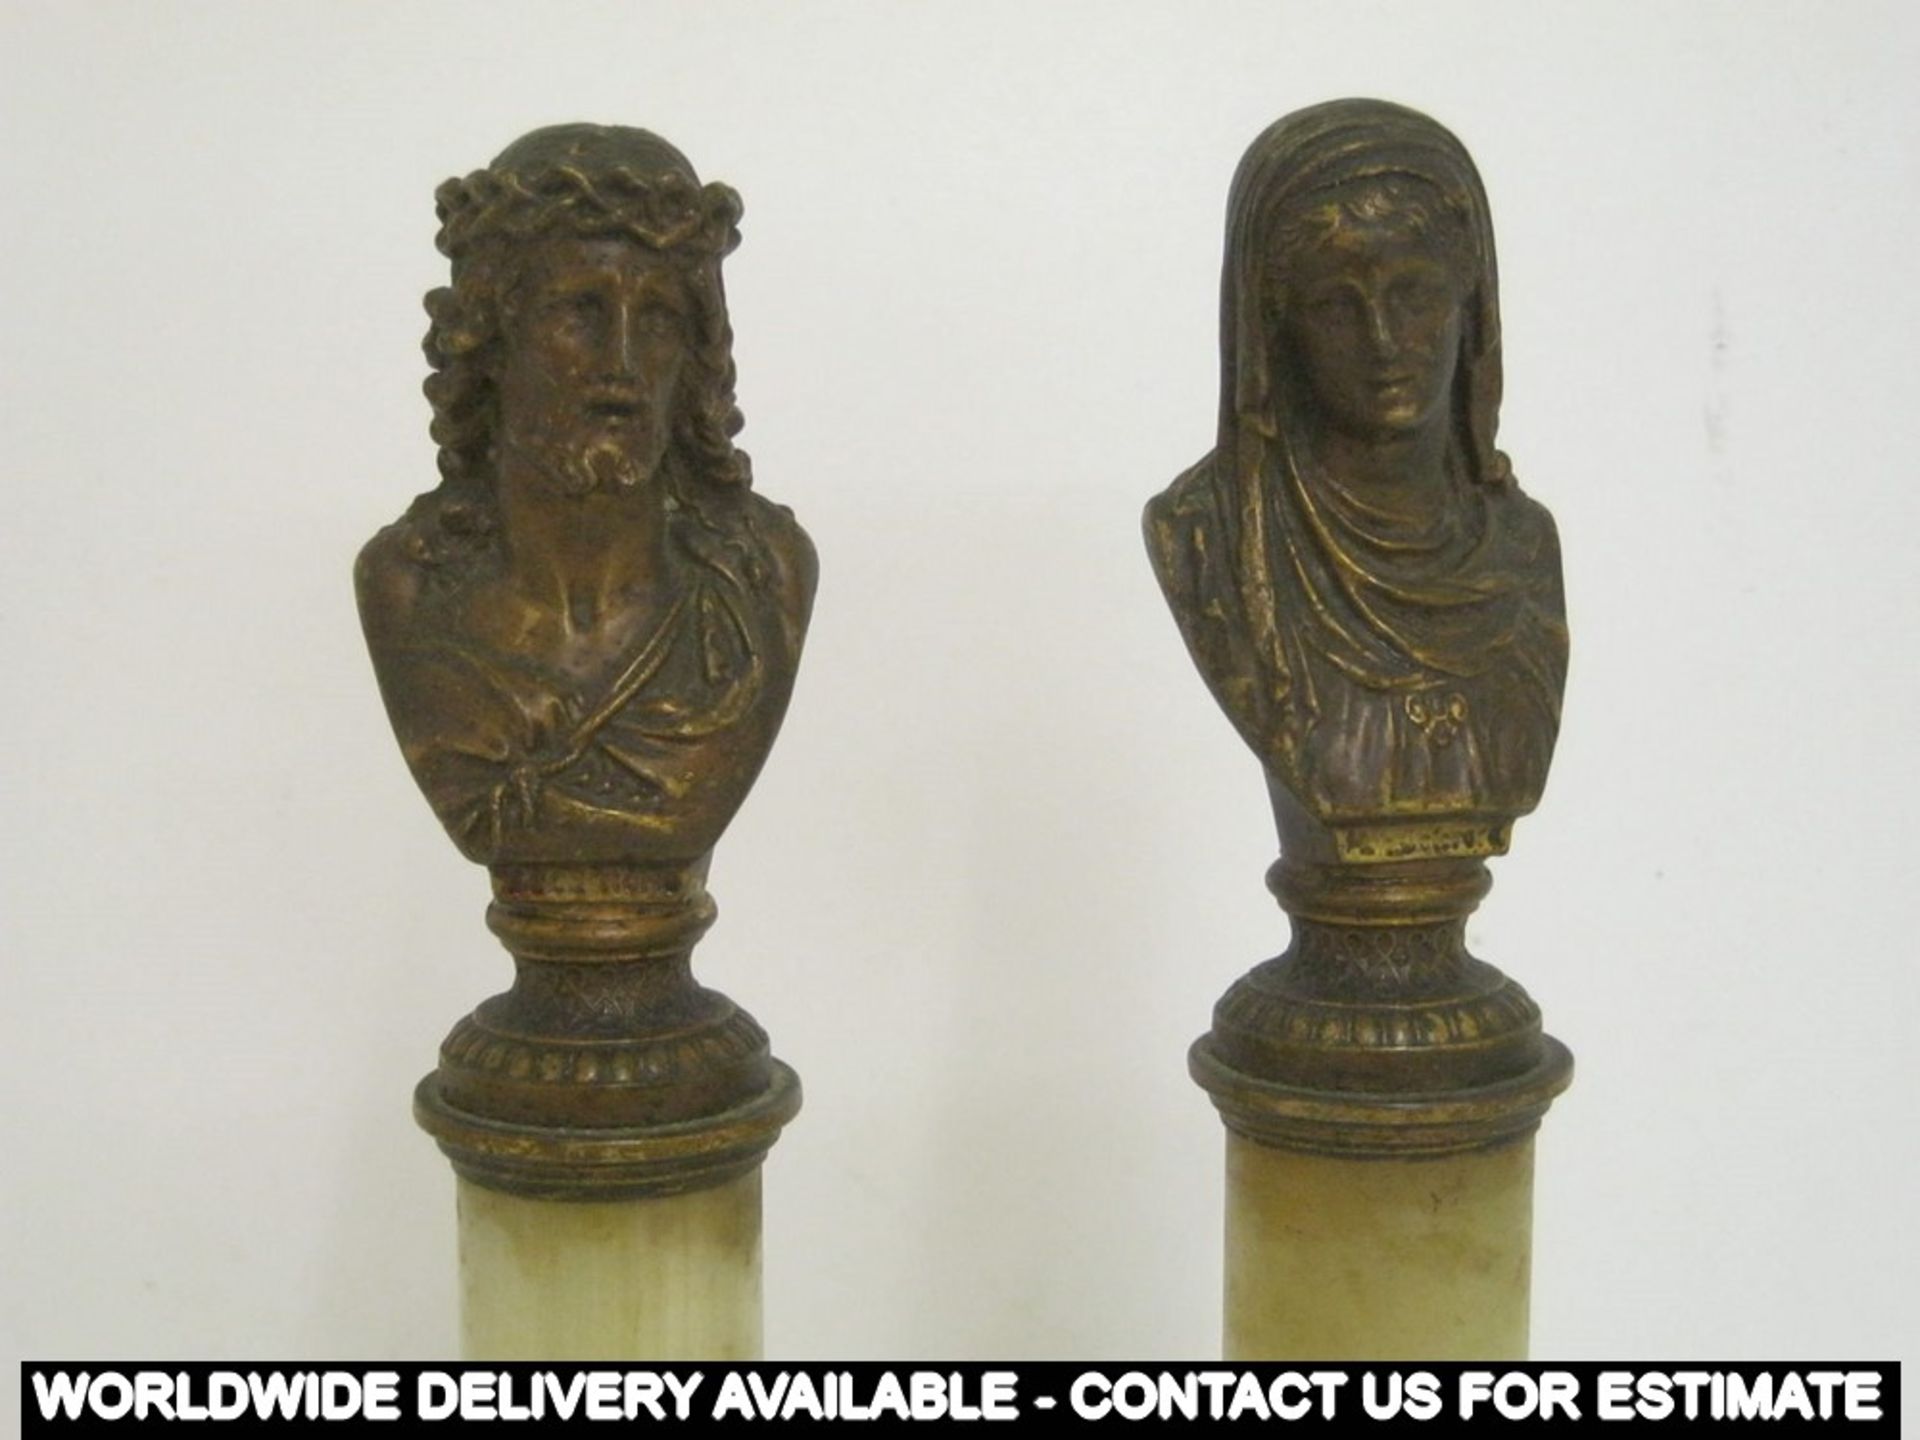 Pair of gilt bronze mounted figures of Jesus Christ and Mary Magdalene - Image 2 of 2